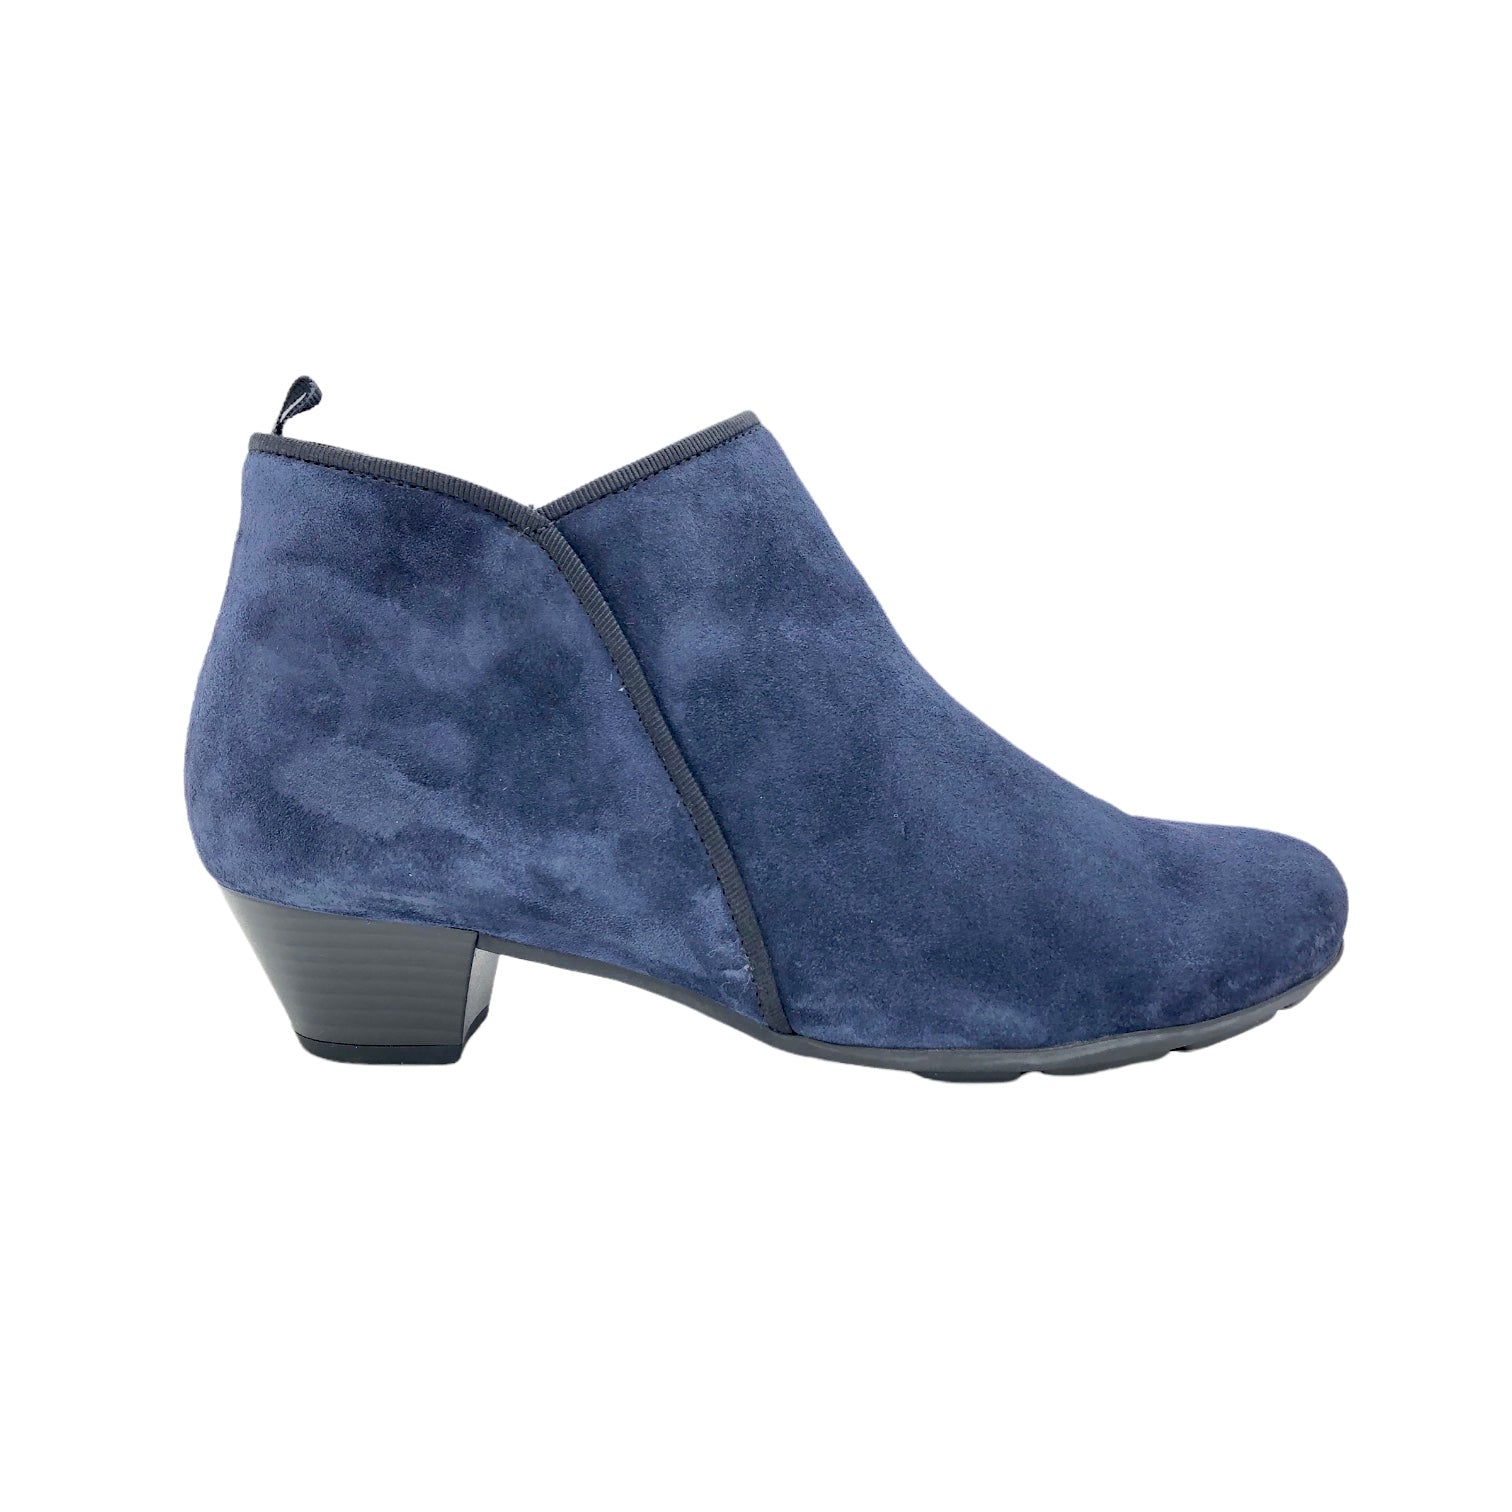 Gabor Trudy soft blue booties with dressy low heel –